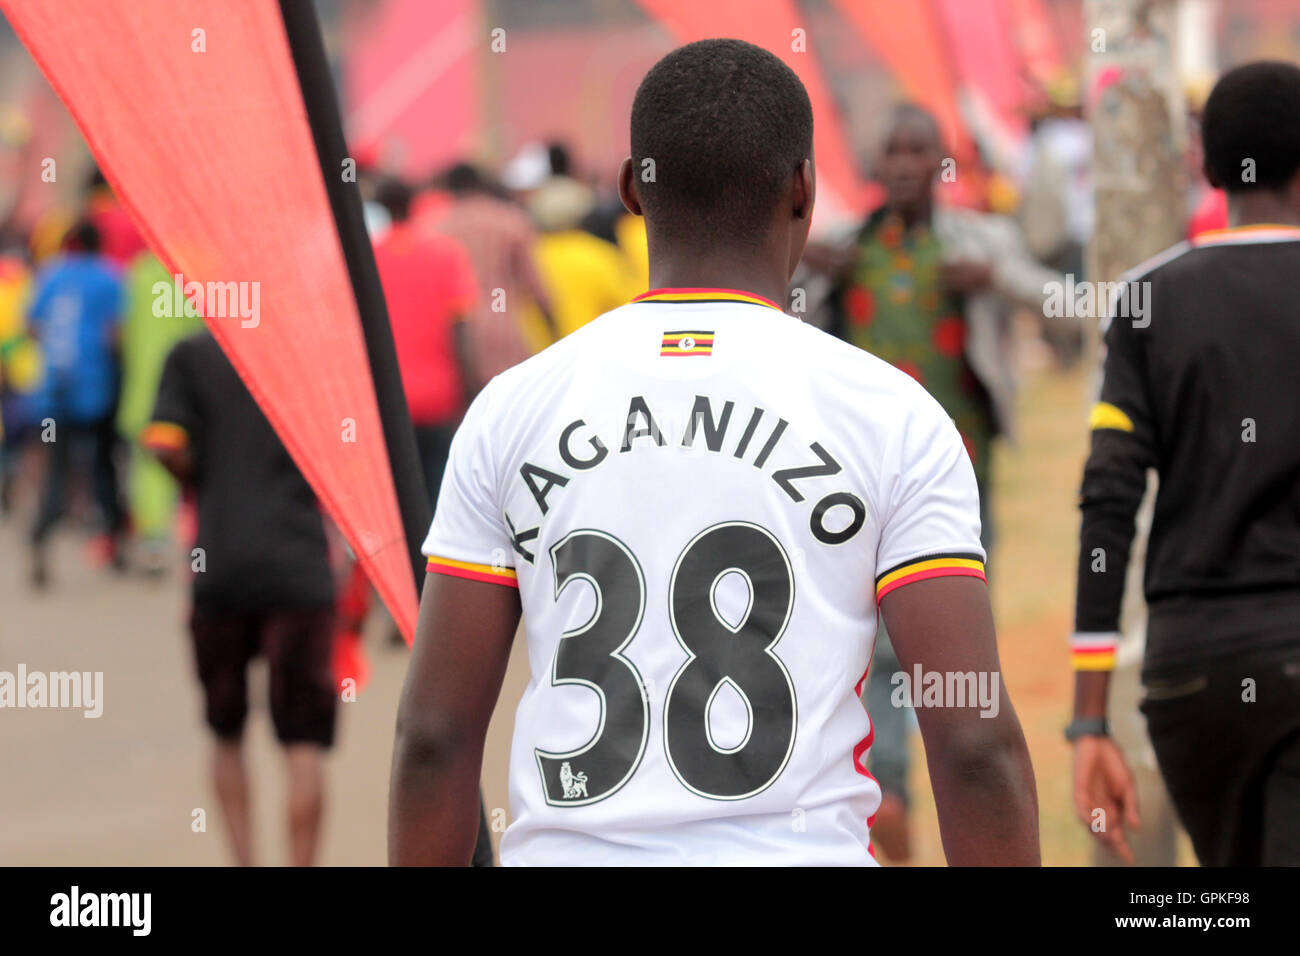 Kampala, Uganda. September 4, 2016. A Uganda Cranes fan dons the Uganda national soccer jersey depicting 38 years of limbo in the Africa Cup of Nations. Uganda ended the long wait after beating Comoros 1-0 to qualify for the finals due in Gabon next year. Credit:  Samson Opus/Alamy Live News Stock Photo